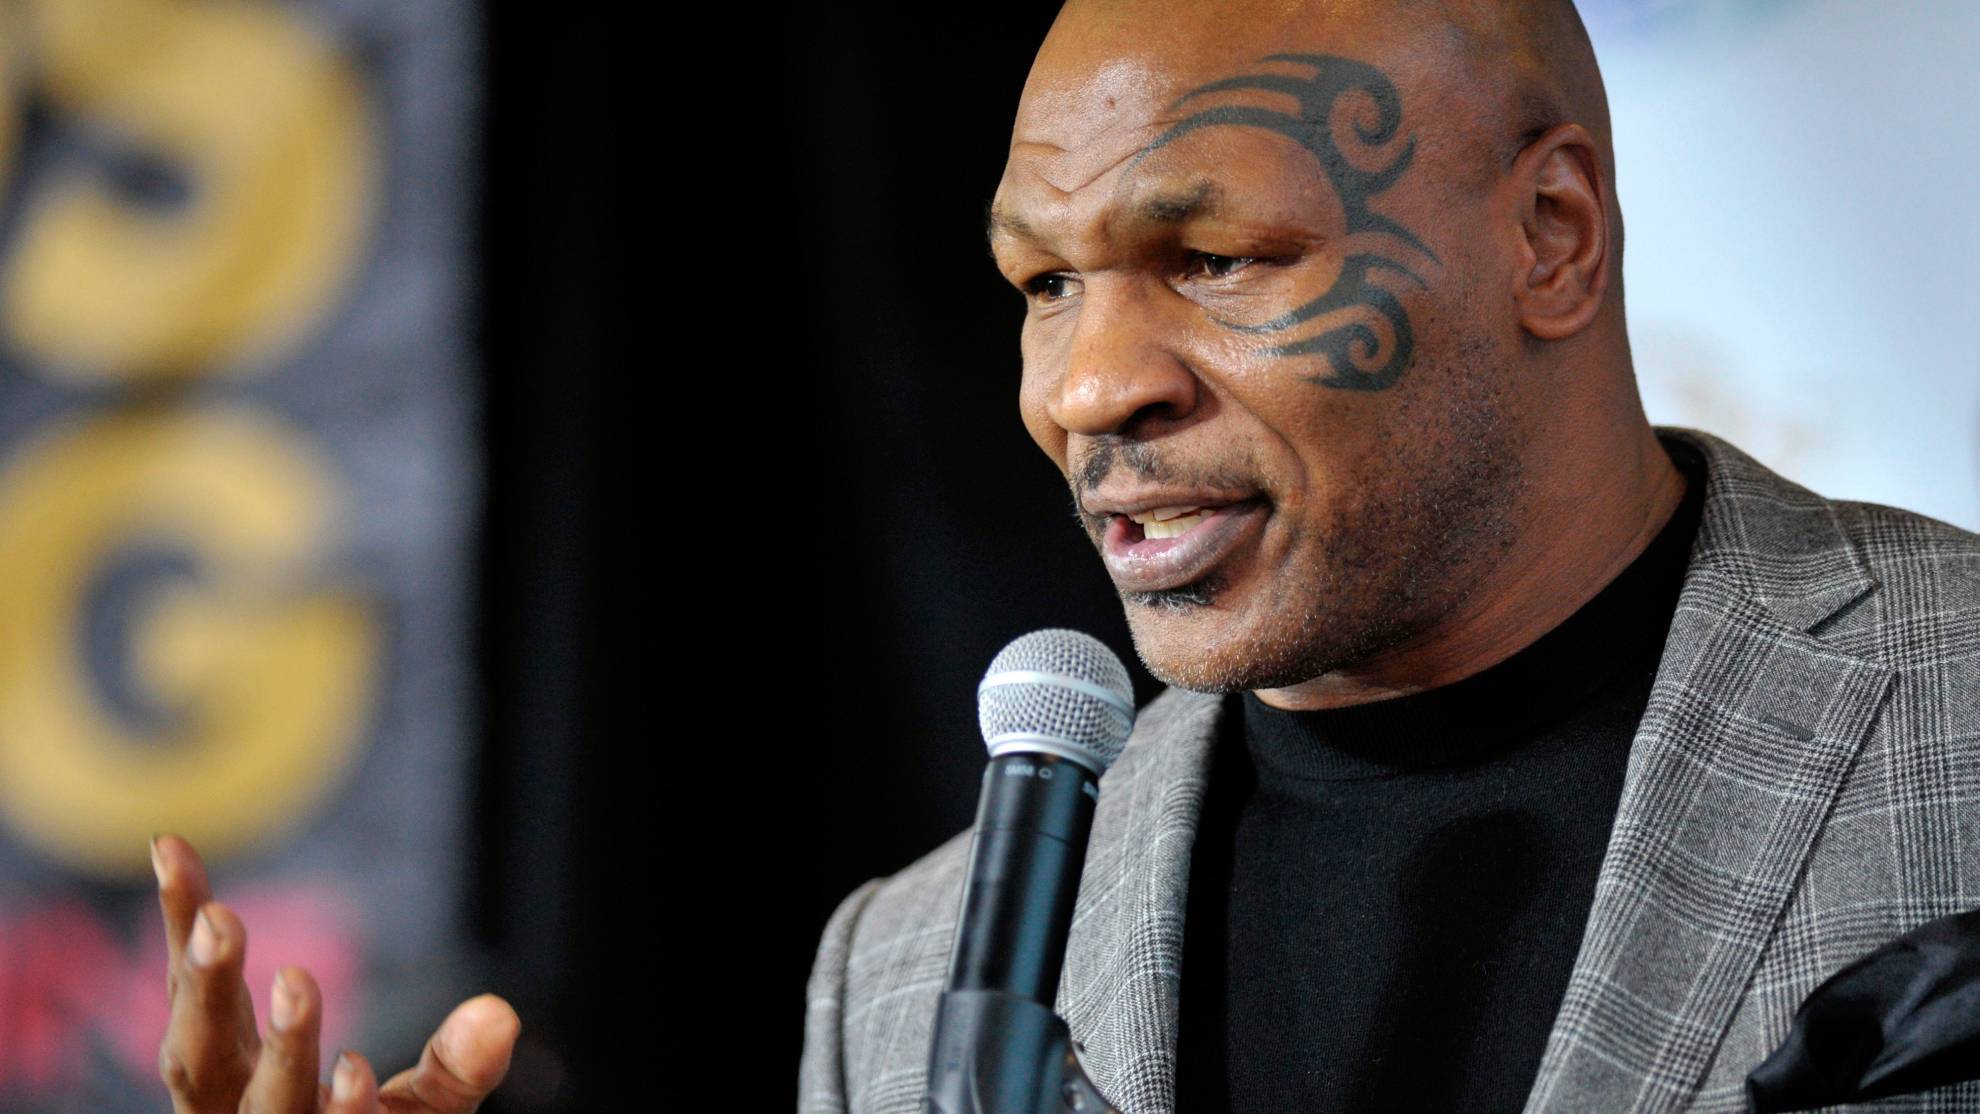 Mike Tyson Talking with a mic, his face tattoo is visible